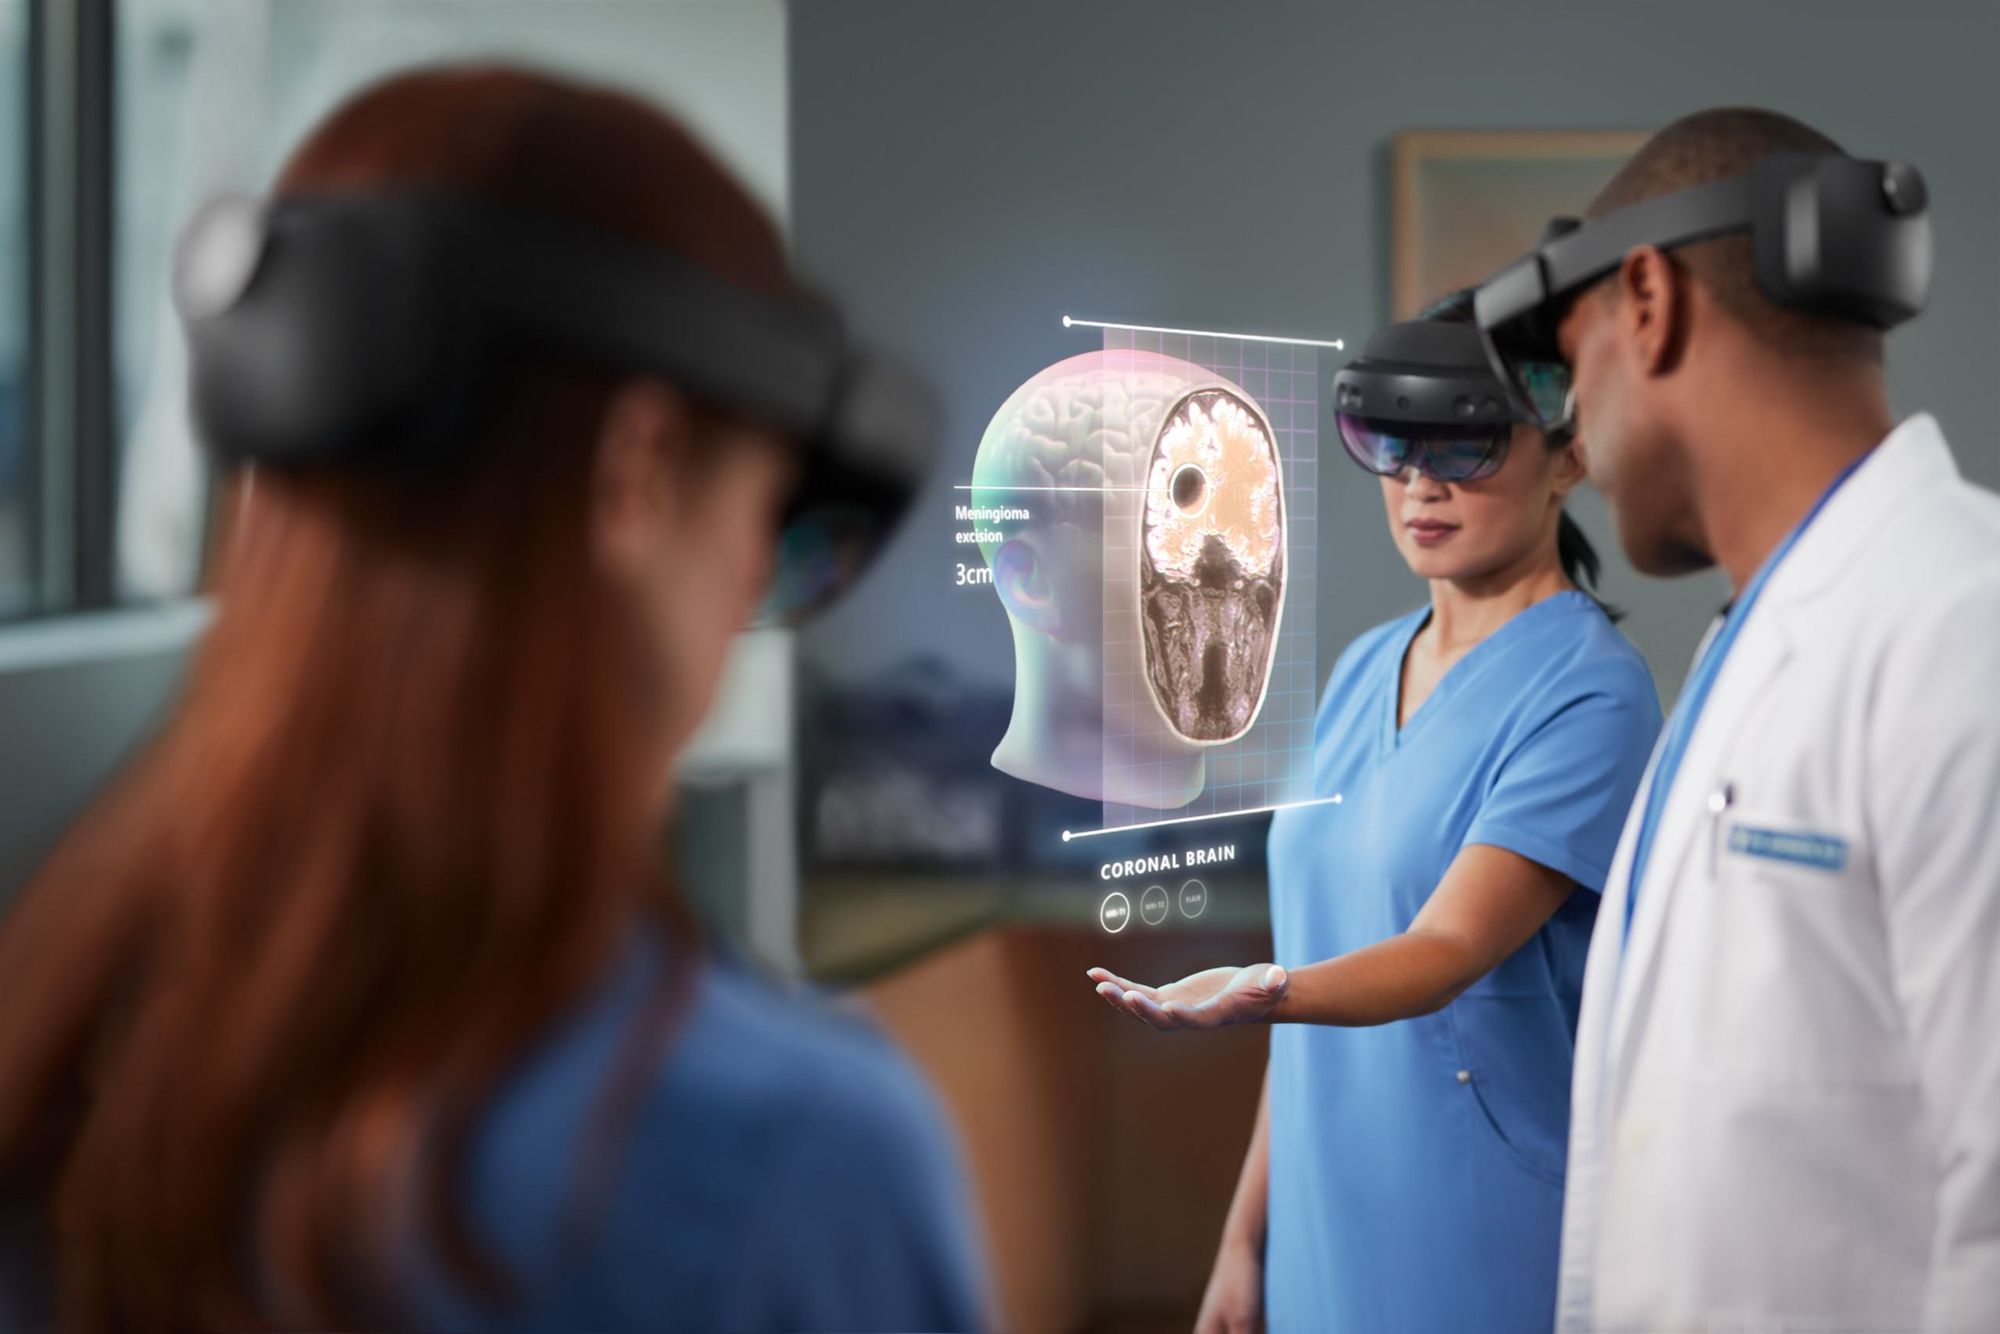 Two women and one man with XR headsets on, exploring a brain in Augmented Reality